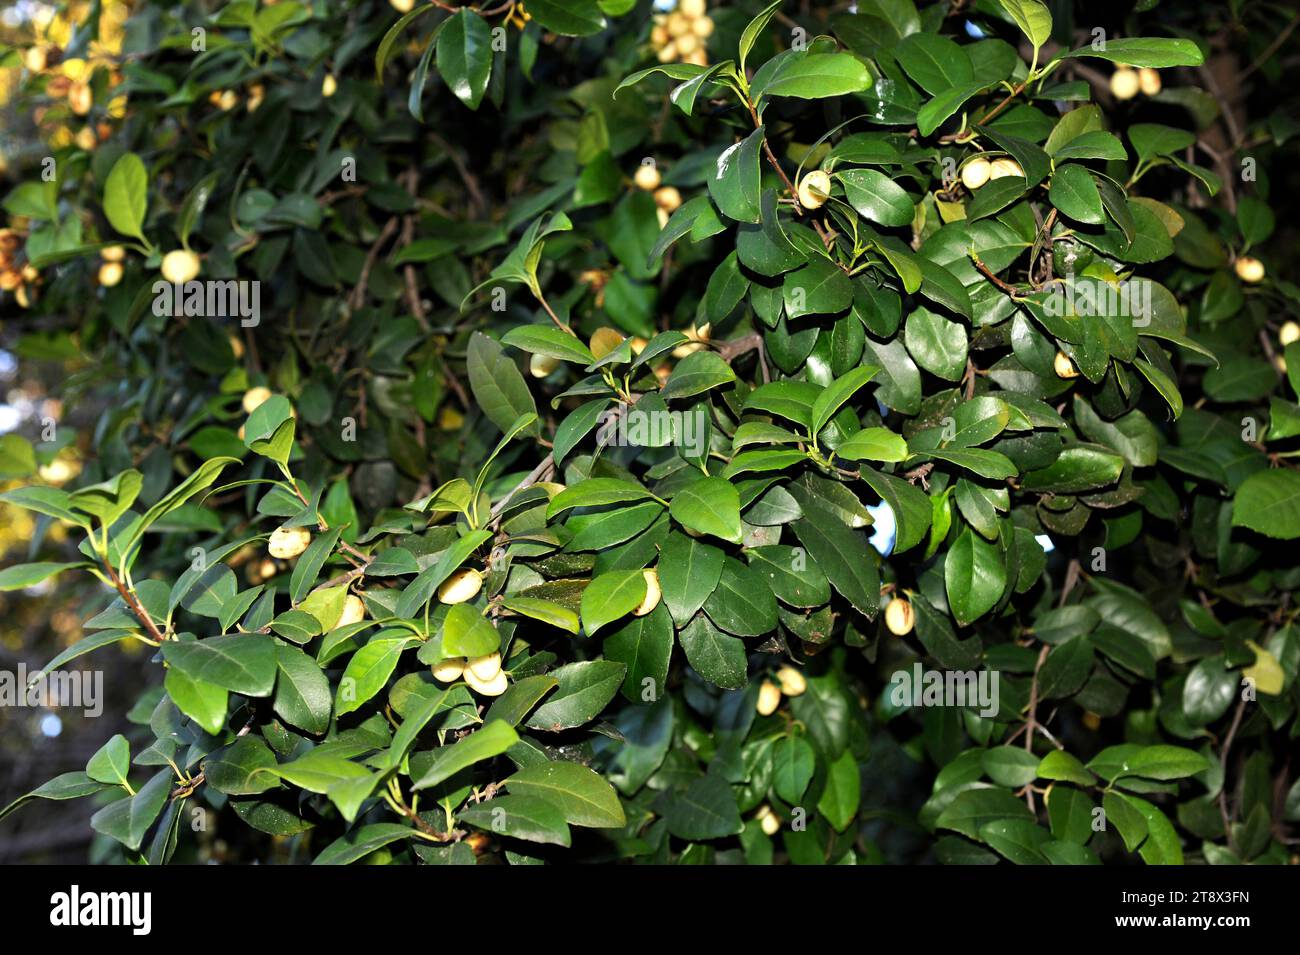 Cassine papillosa or Elaeodendron papillosum is an evergreen tree native to southern Africa. Stock Photo